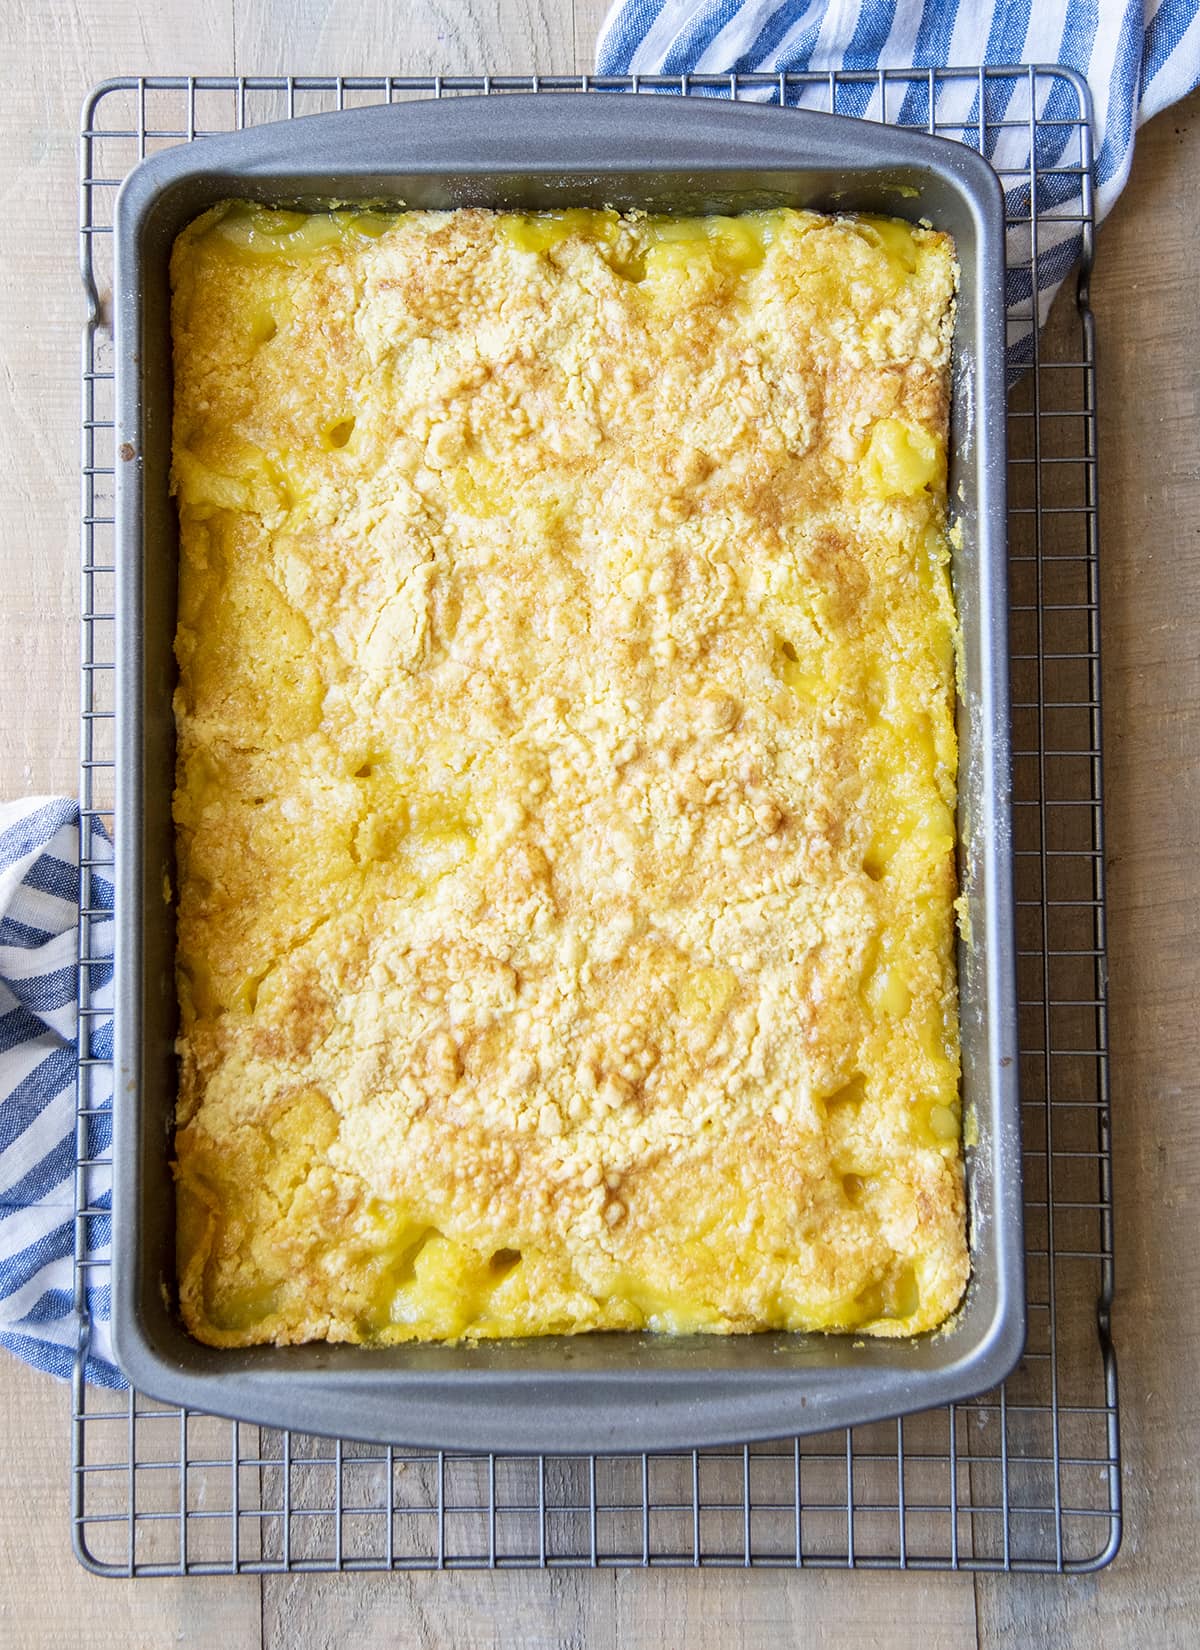 A baking pan of pineapple cobbler from above on a cooling rack.